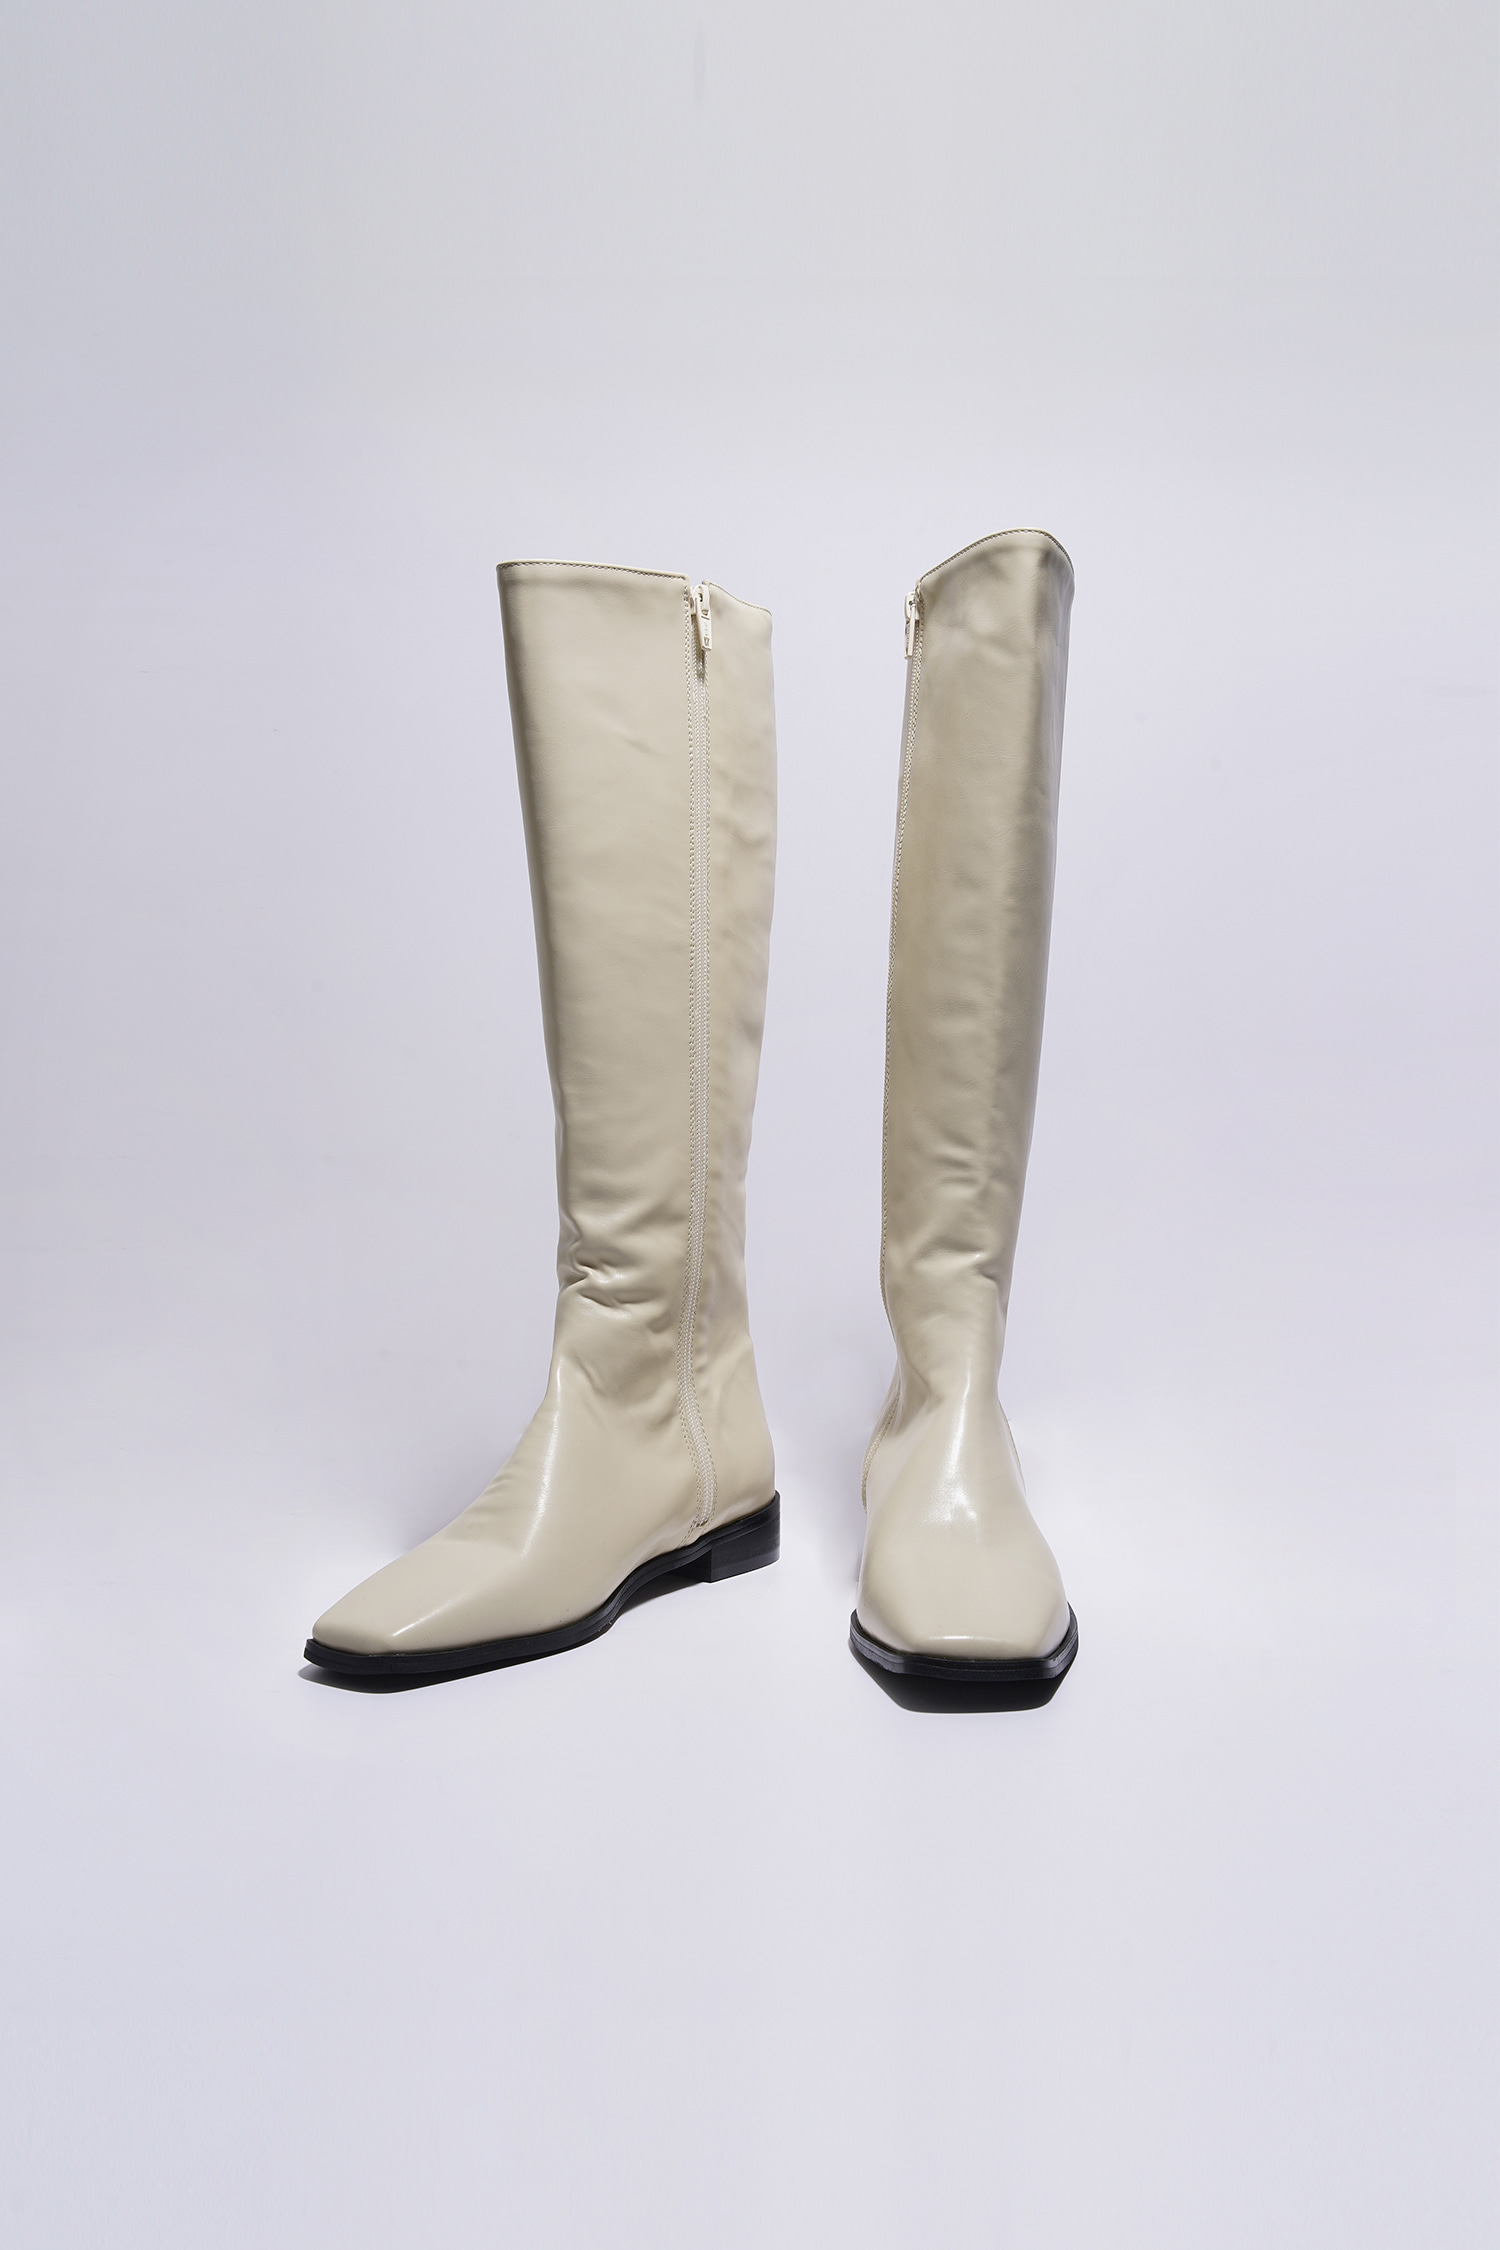 Clair square boots - ivory